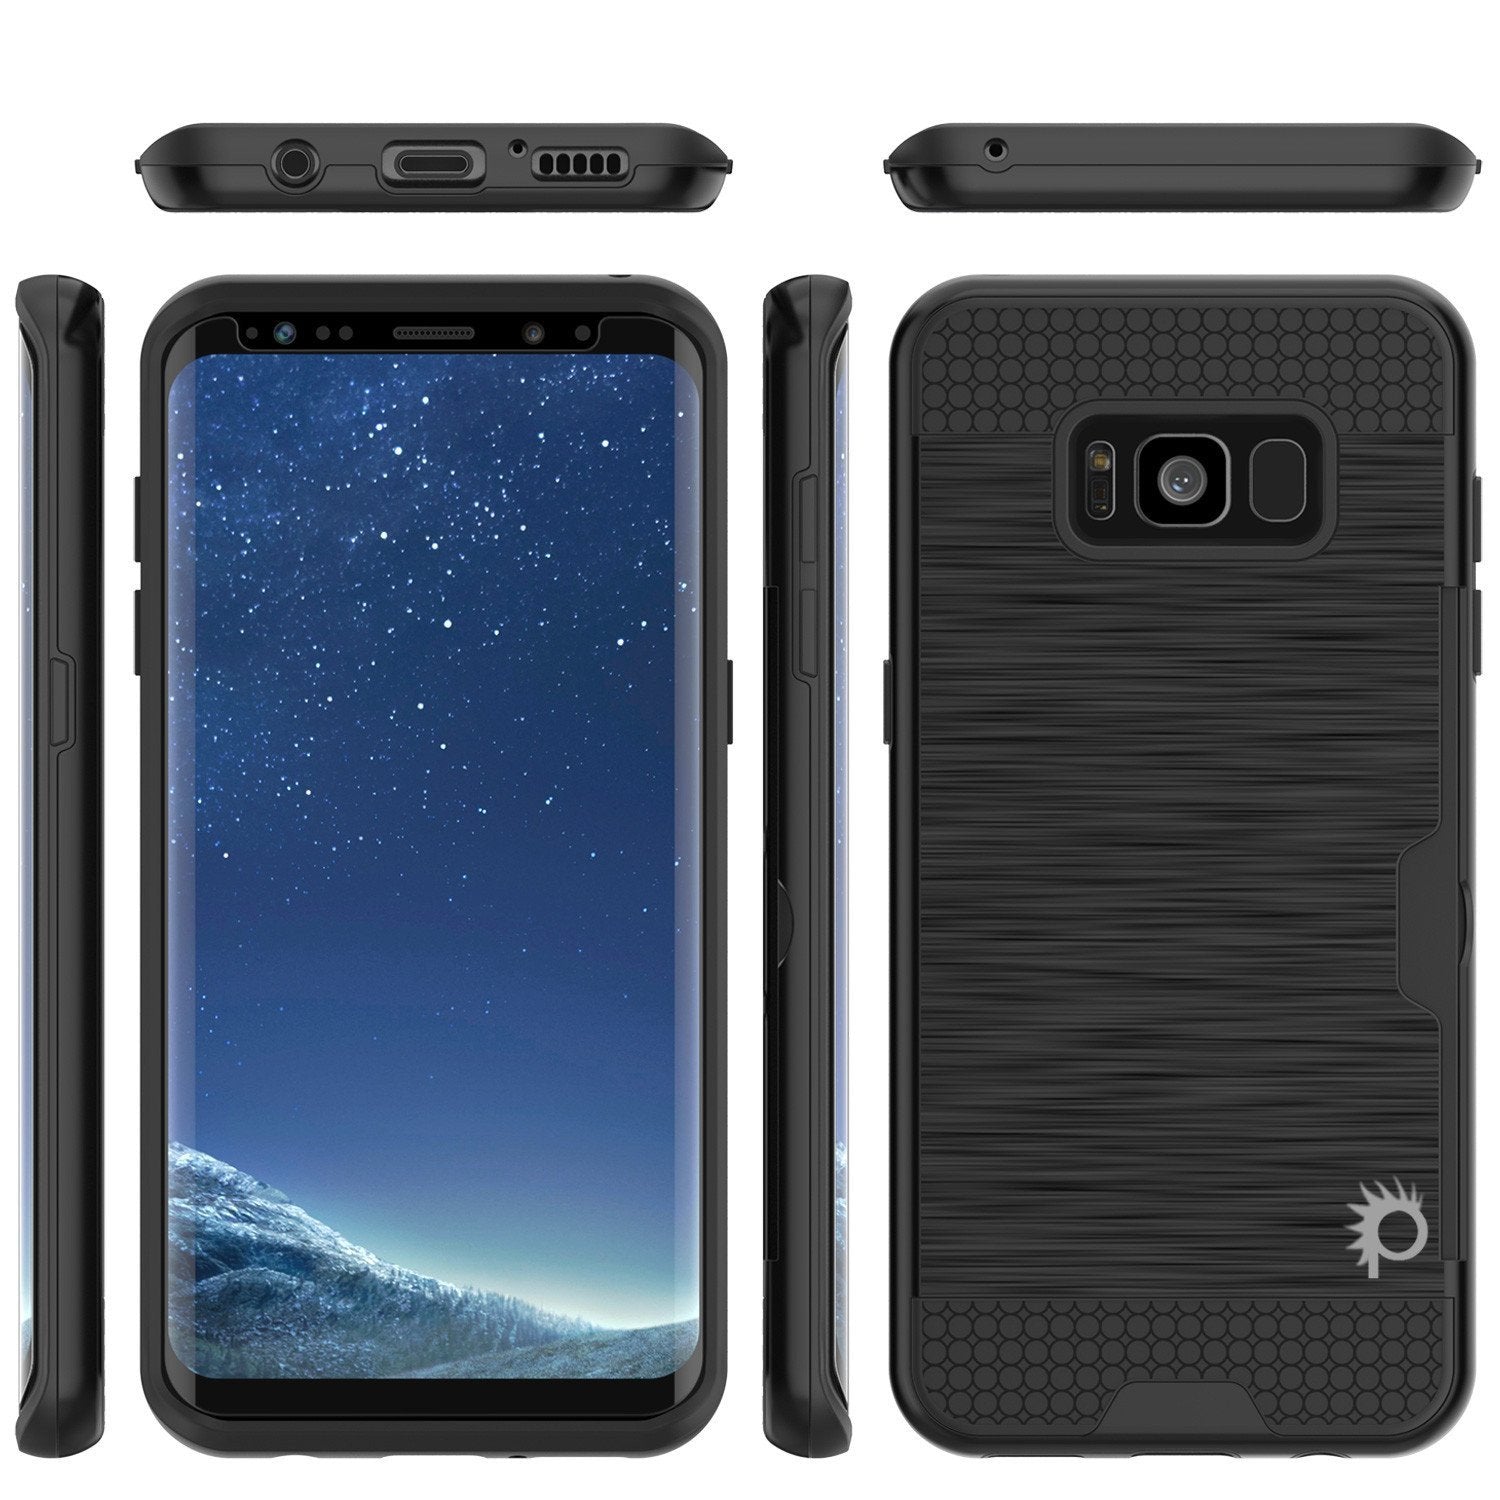 Galaxy S8 Case, PUNKcase [SLOT Series] [Slim Fit] Dual-Layer Armor Cover w/Integrated Anti-Shock System, Credit Card Slot & PUNKSHIELD Screen Protector for Samsung Galaxy S8 [Black] - PunkCase NZ